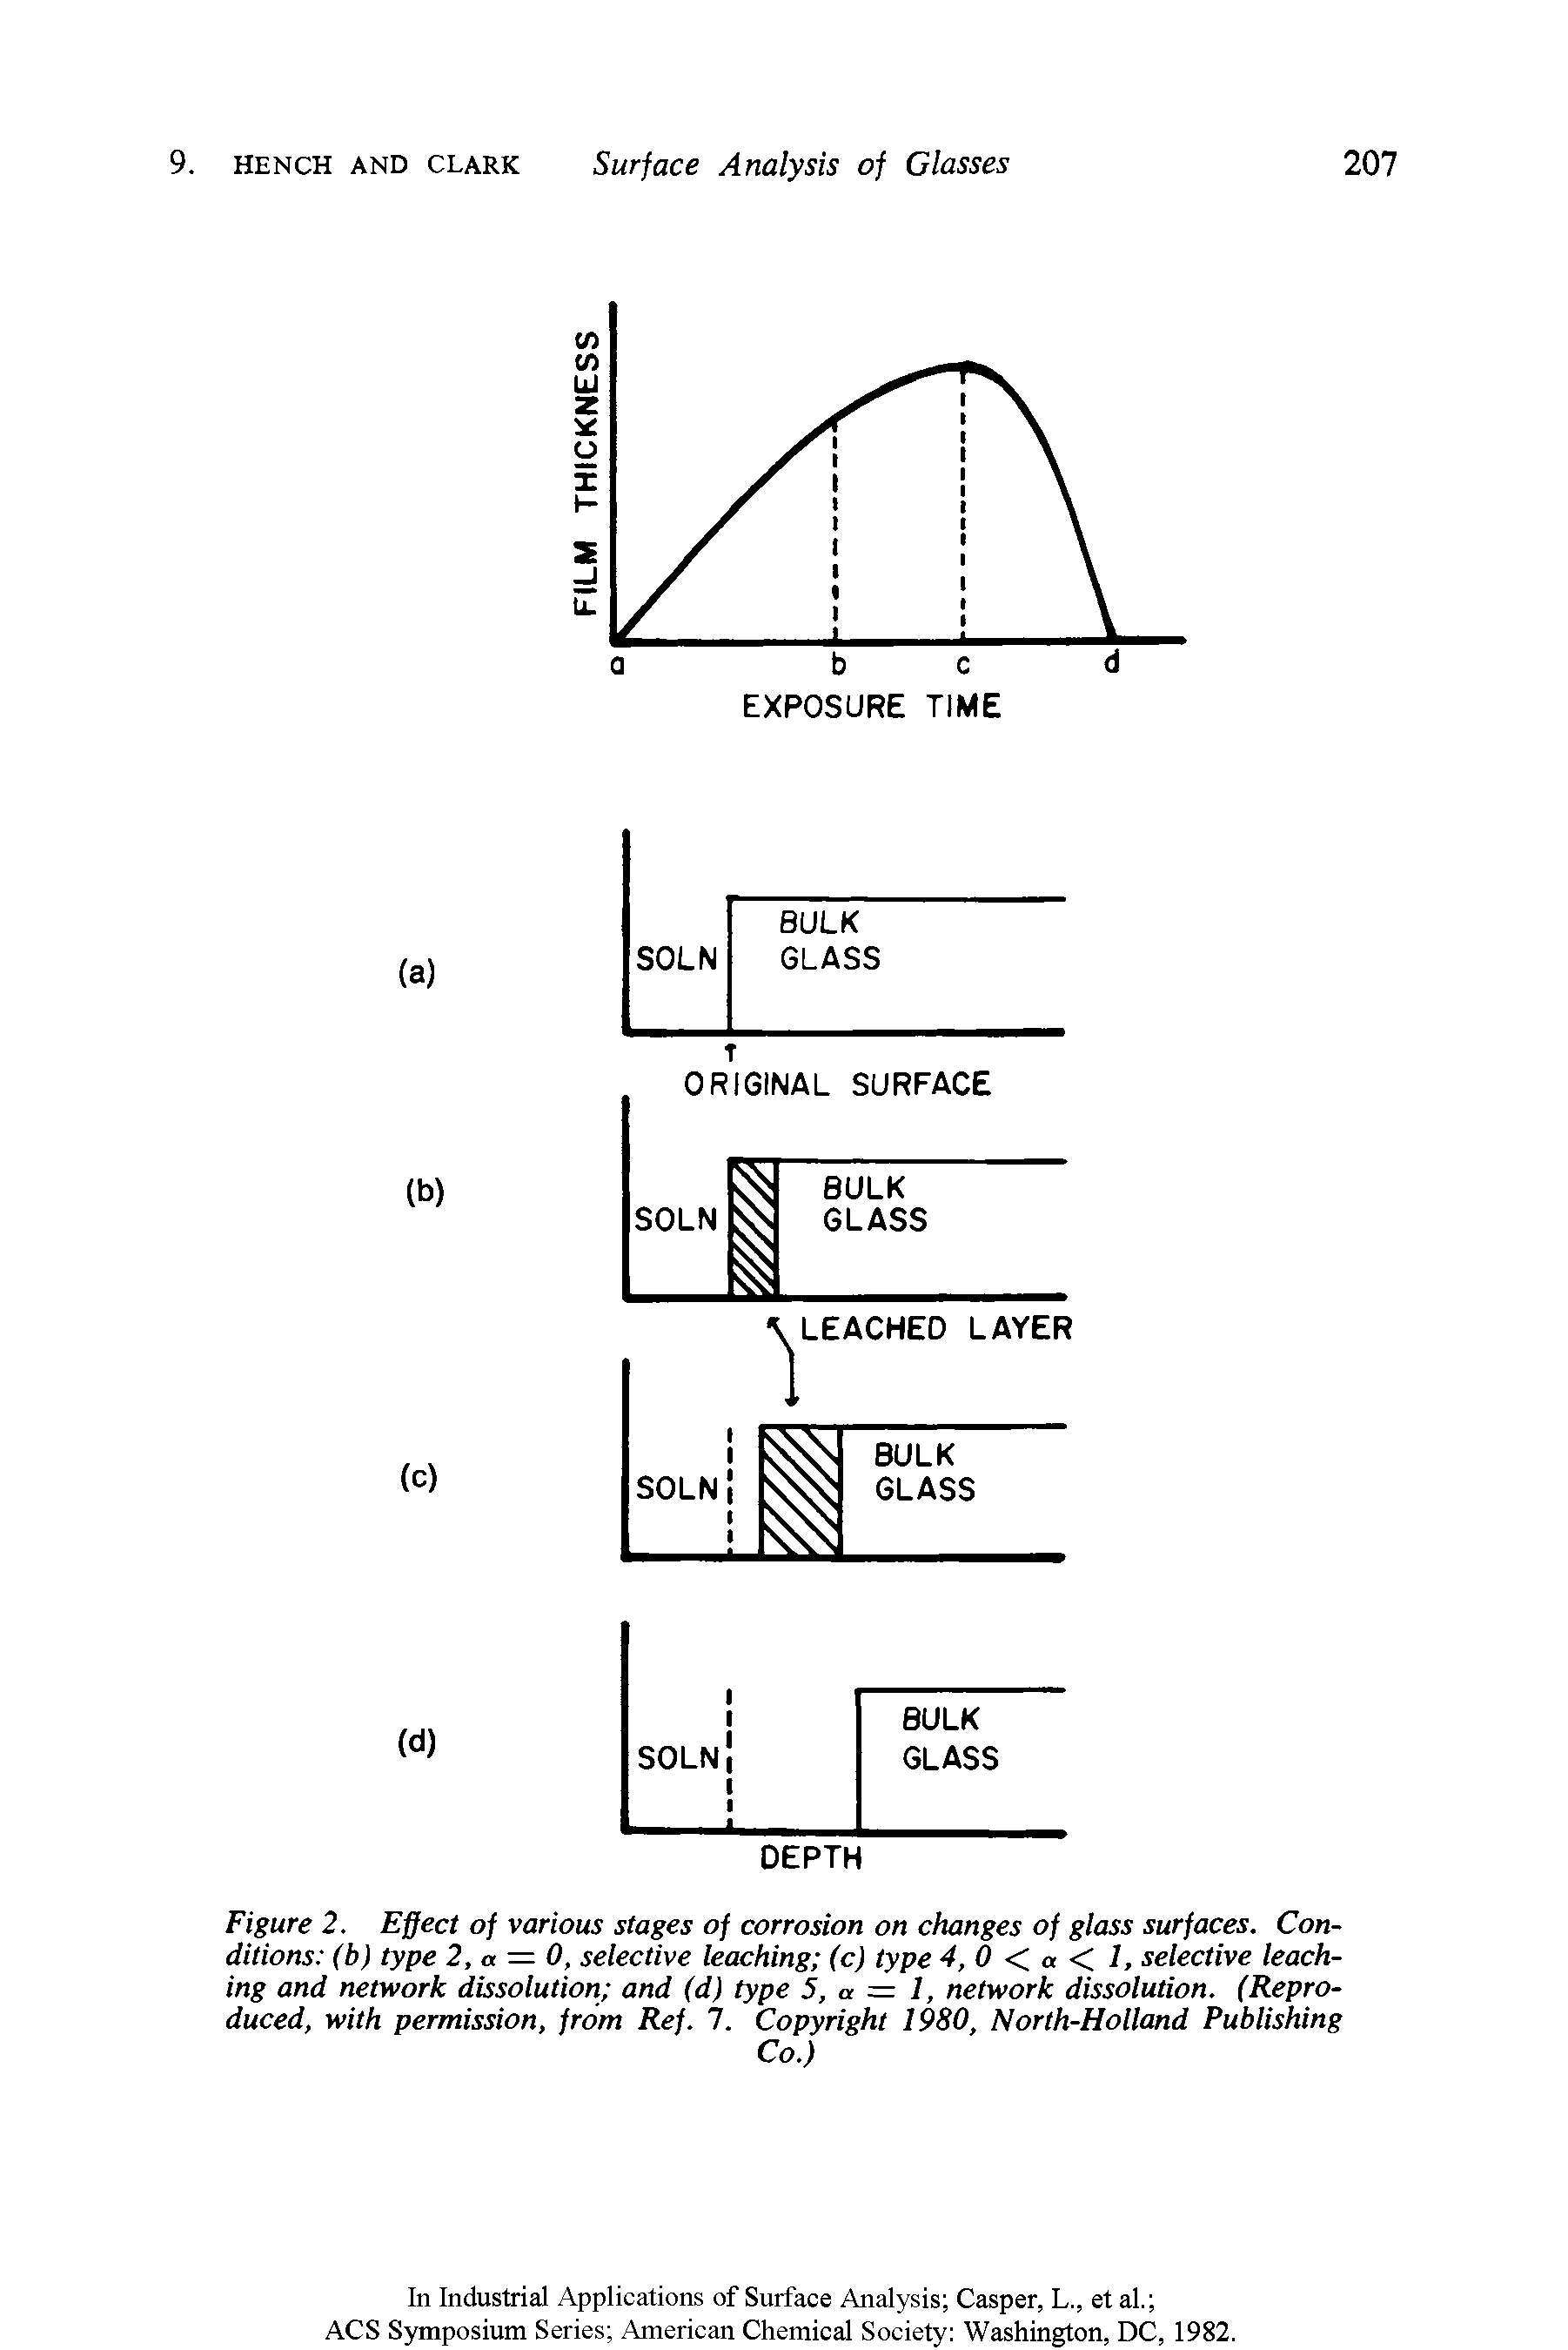 Figure 2. Effect of various stages of corrosion on changes of glass surfaces. Conditions (b) type 2, a = 0, selective leaching (c) type 4, 0 < a < 1, selective leaching and network dissolution and (d) type 5, a = 1, network dissolution. (Reproduced, with permission, from Ref. 7. Copyright 1980, North-Holland Publishing...